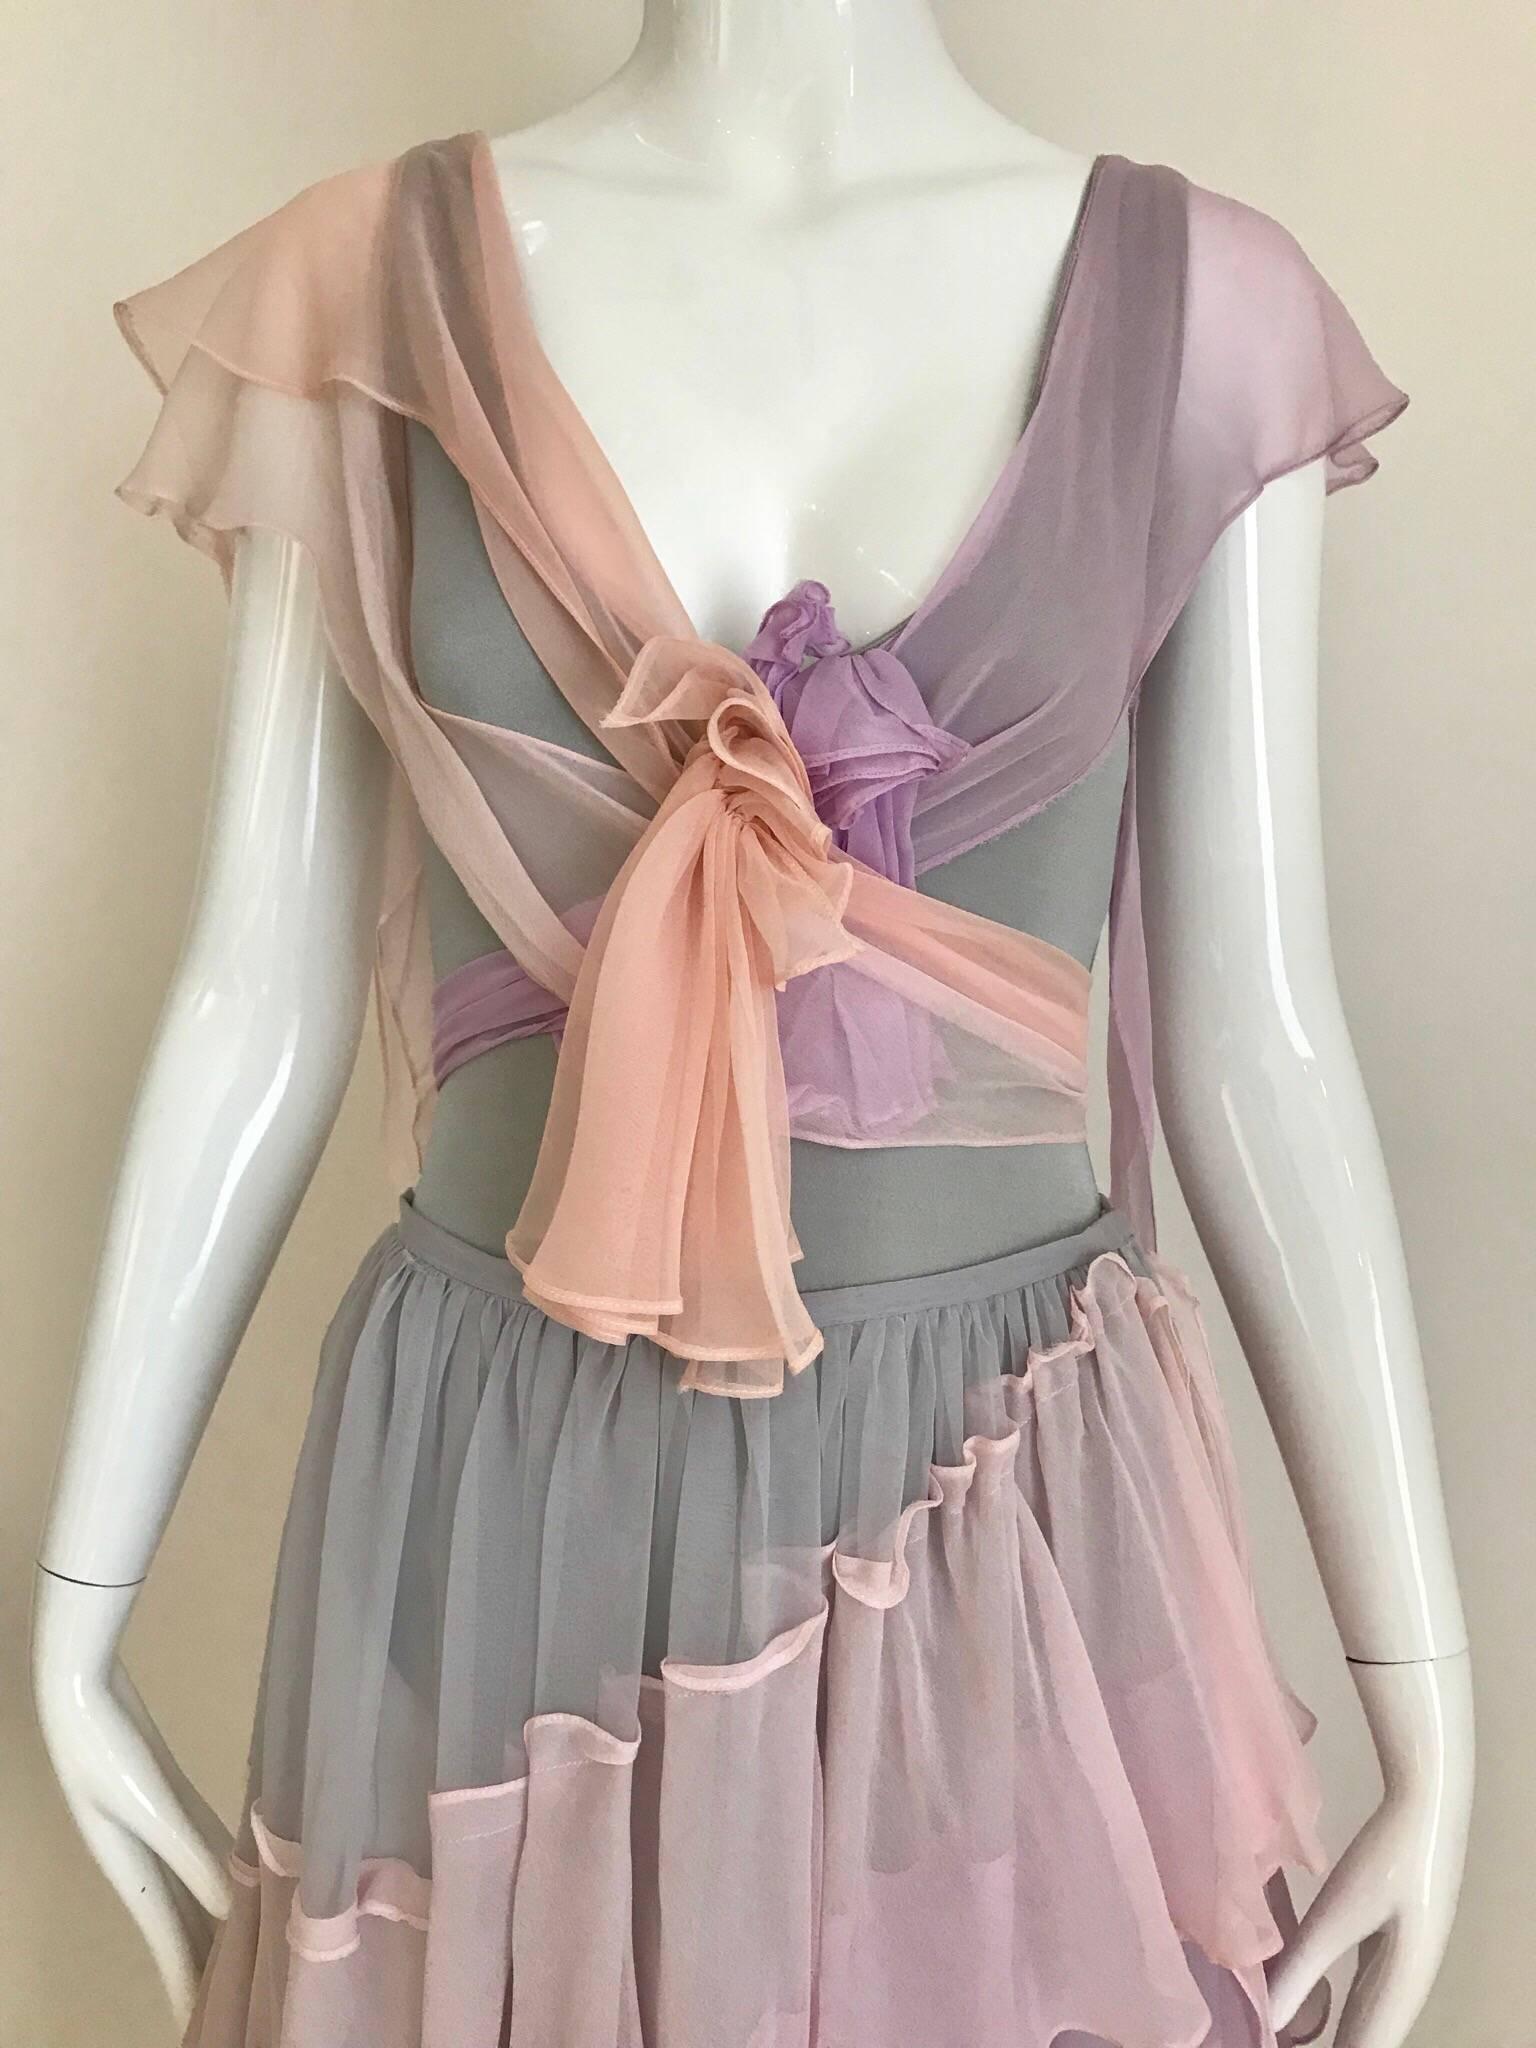 Romantic and sexy vintage Giorgio sant'angelo pastel pink and lavender lycra and crepe ruffly body suit and skirt set.  ( snap on body suit)  Size: Small - Medium